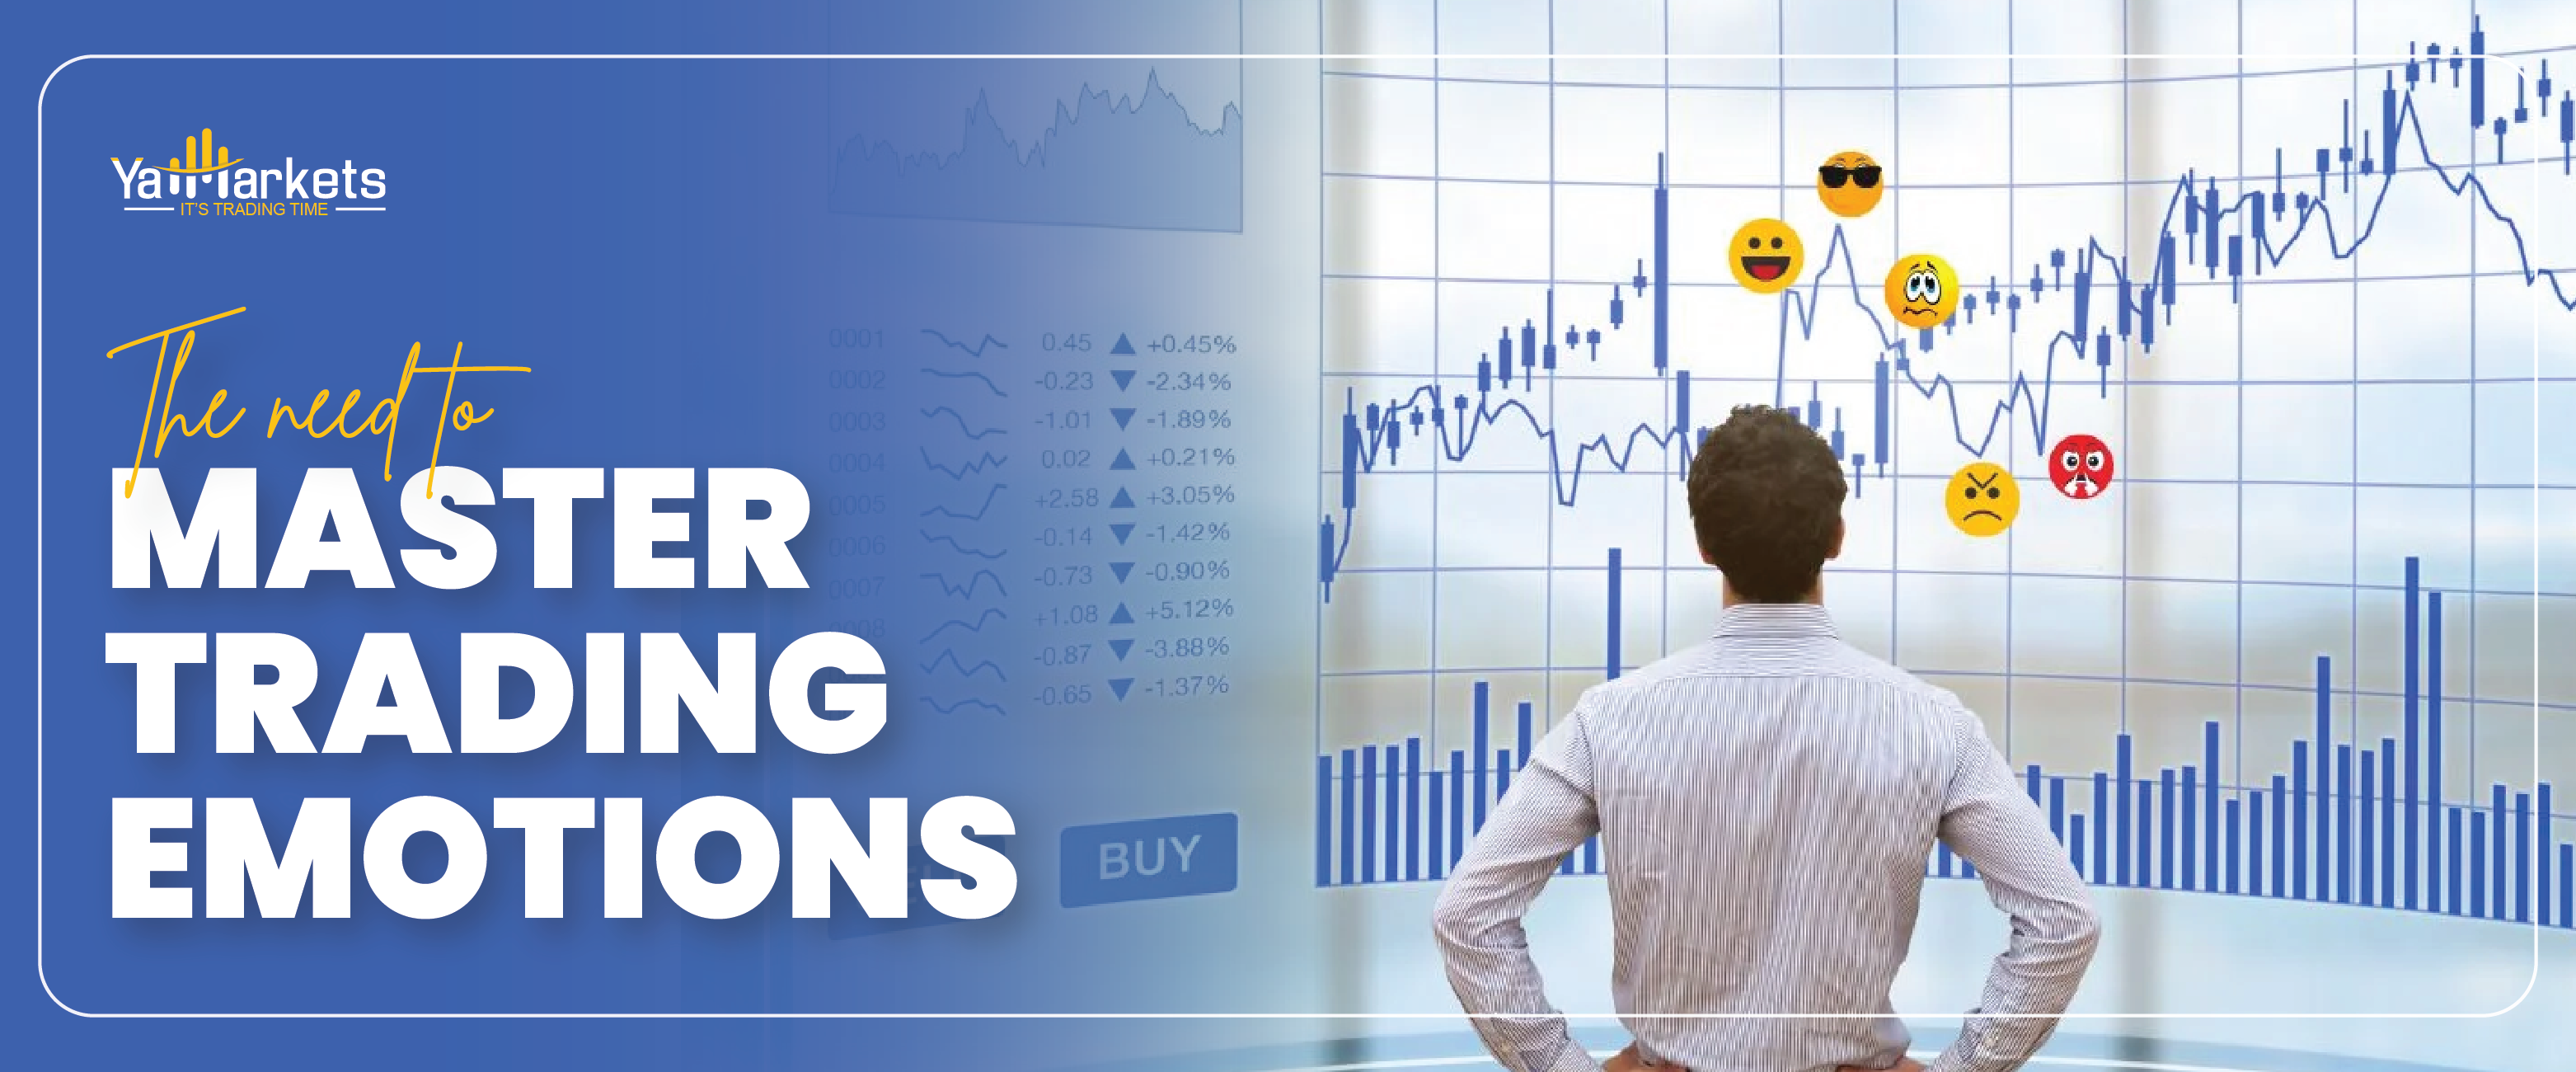 The need to master trading emotions